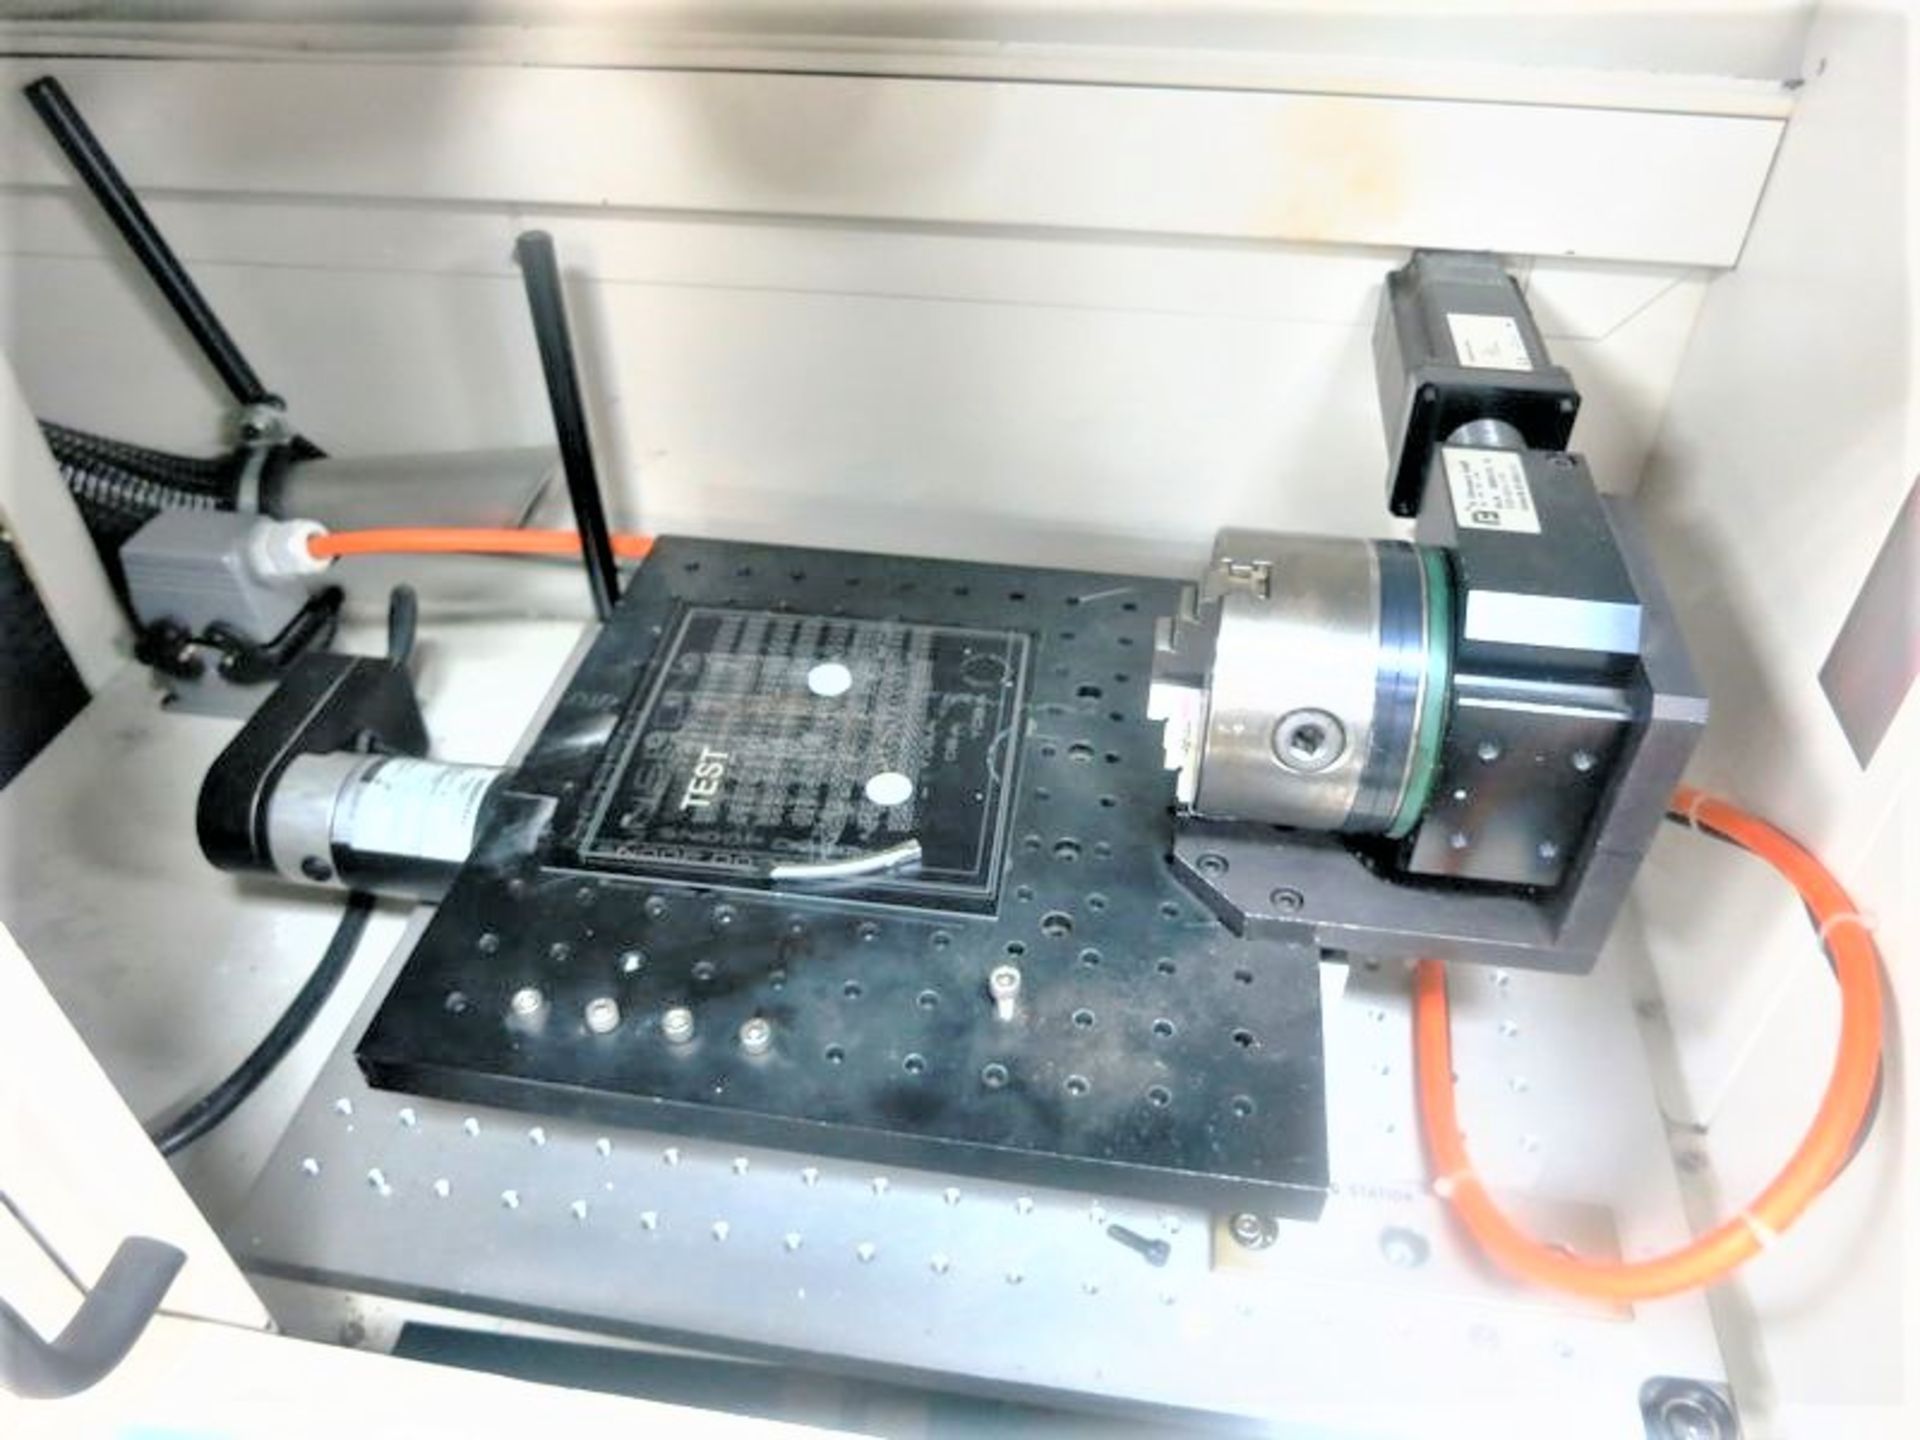 Rofin Starmark SLM 10E Fully Programmable CNC Laser Marking System W/Rotary Table - Image 2 of 13